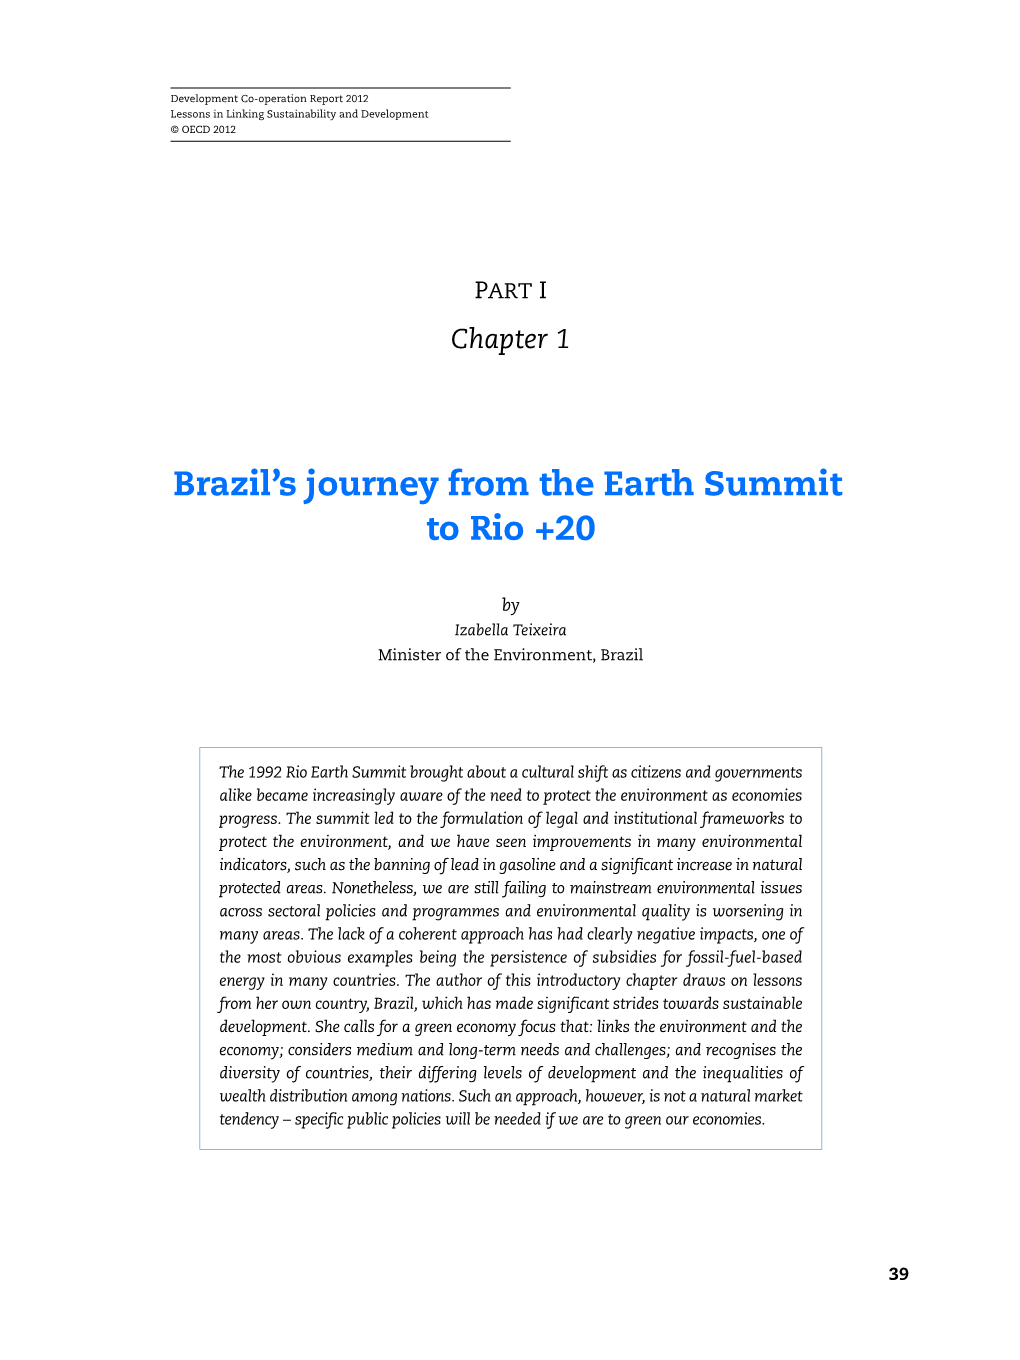 Brazil's Journey from the Earth Summit to Rio